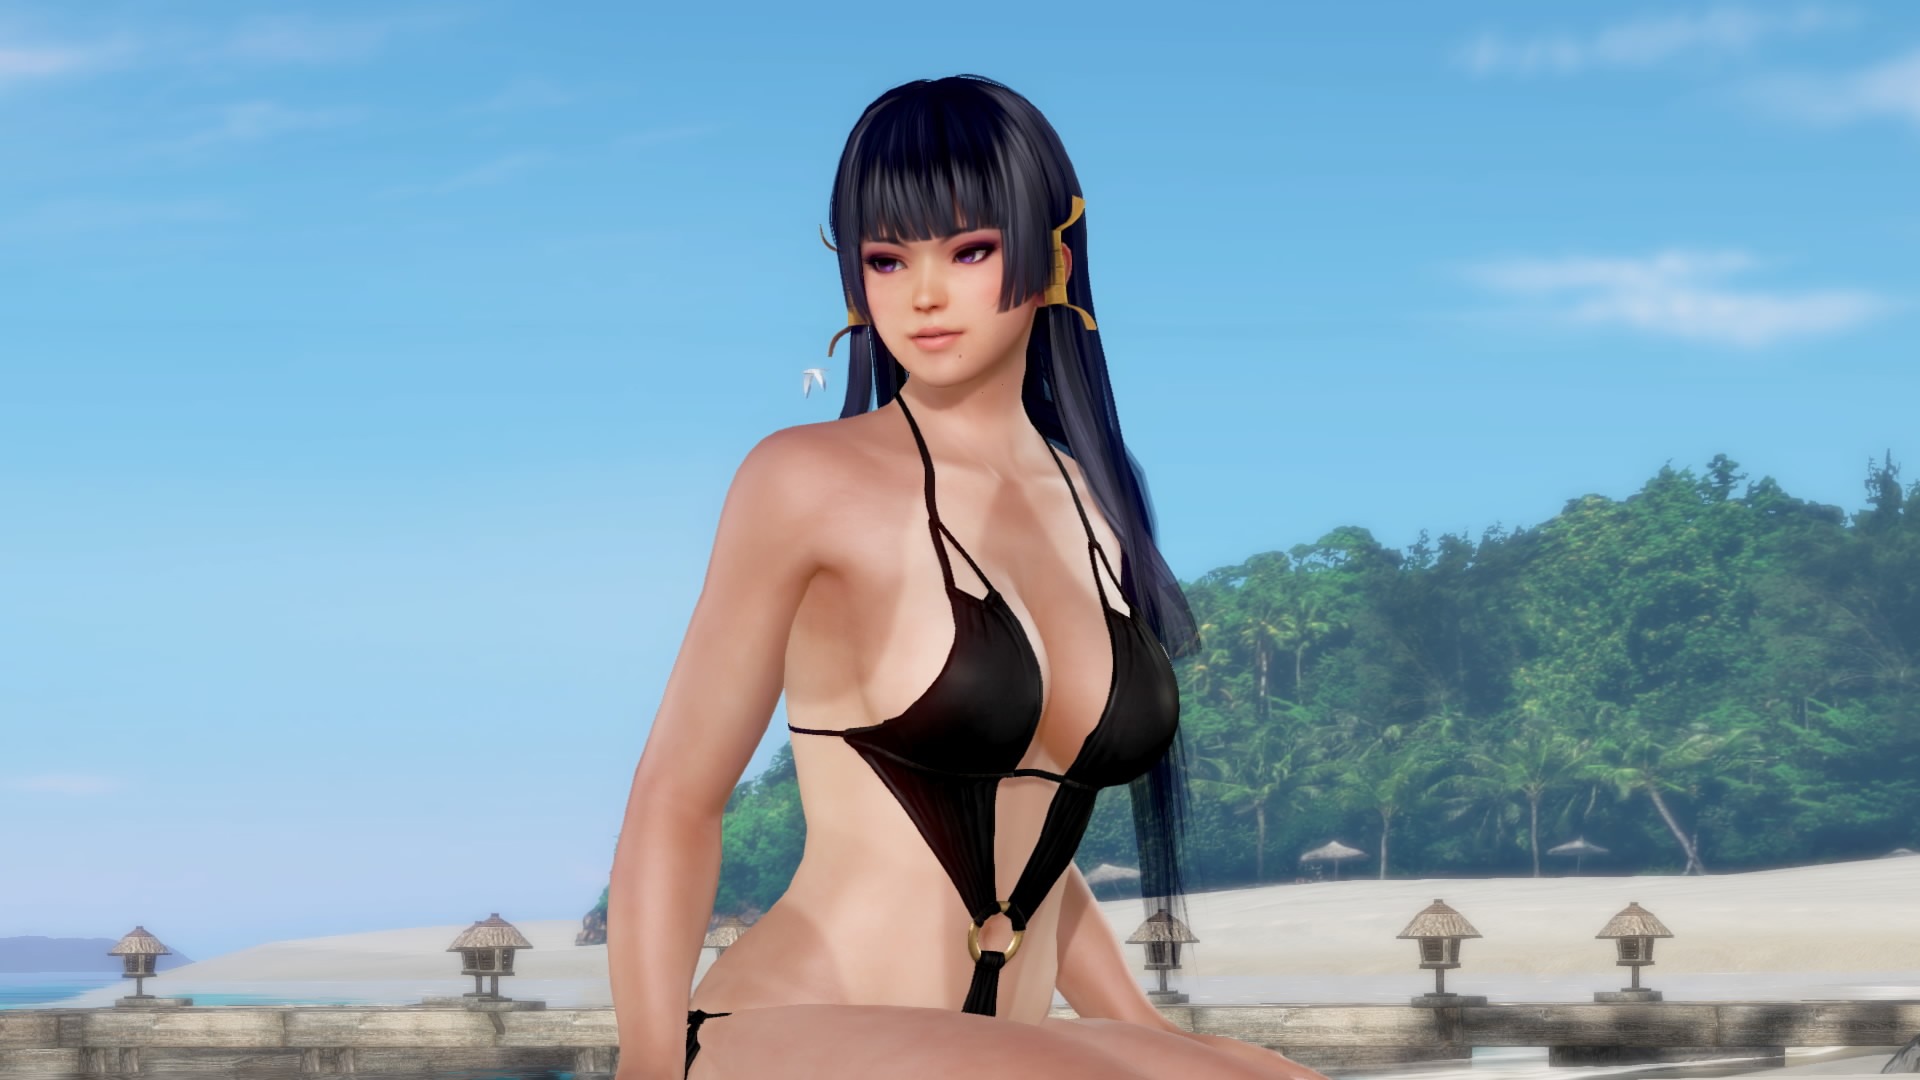 Dog or alive демо. Dead or Alive 6. Dead or Alive Xtreme 5. Dead or Alive Xtreme 6. Dead or Alive Xtreme Нико.